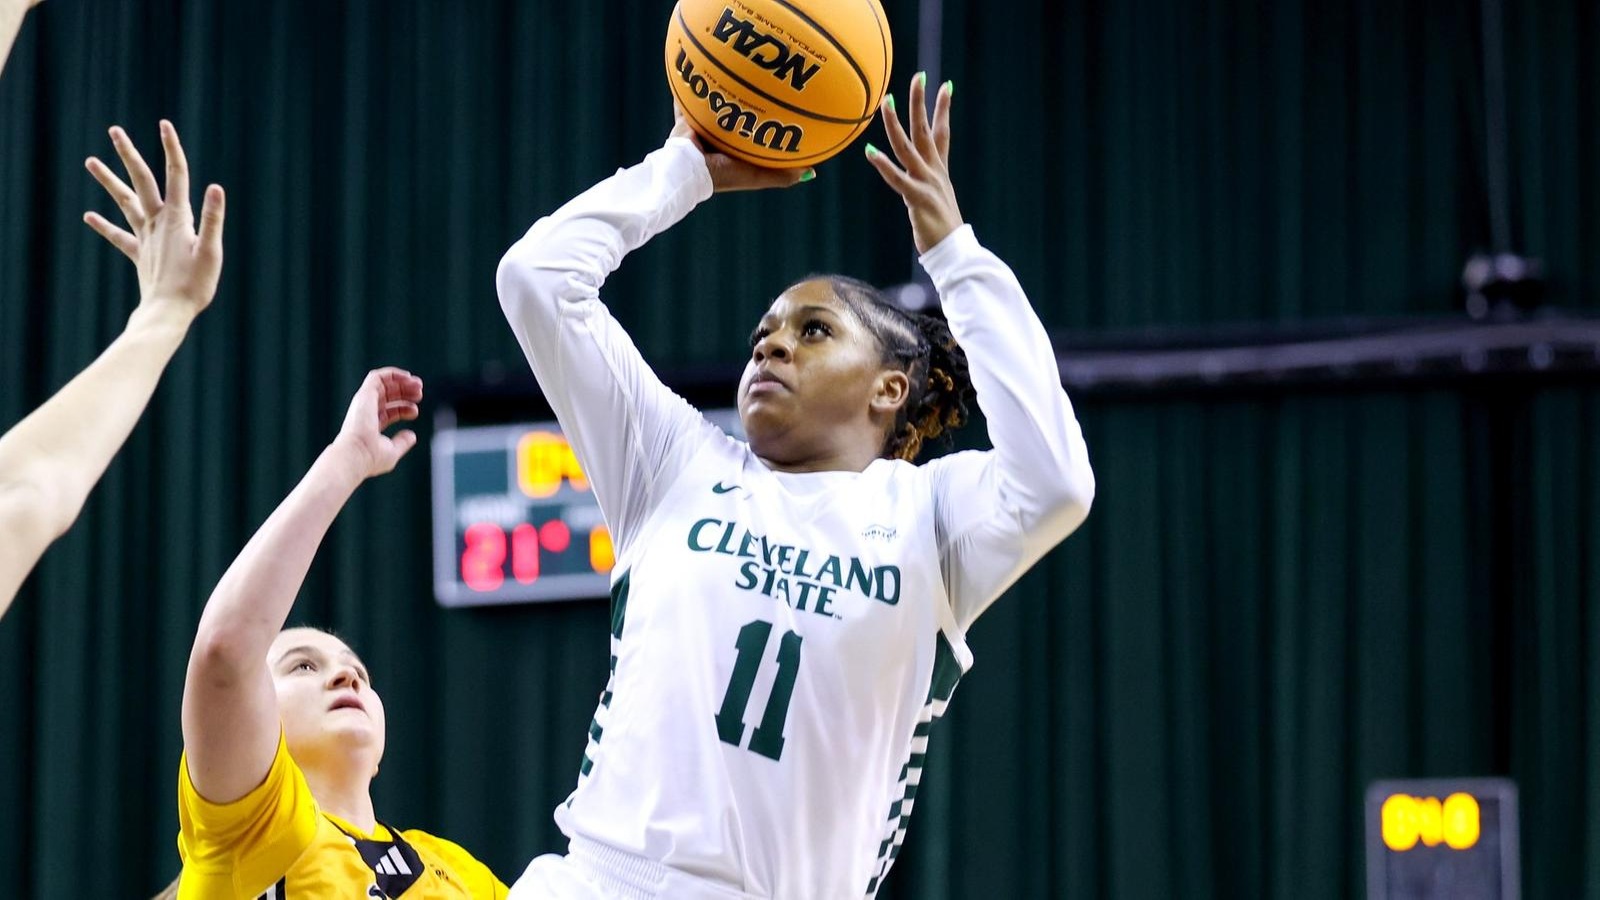 Cleveland State Women’s Basketball Earns 88-78 Victory Over NKU In #HLWBB Quarterfinals